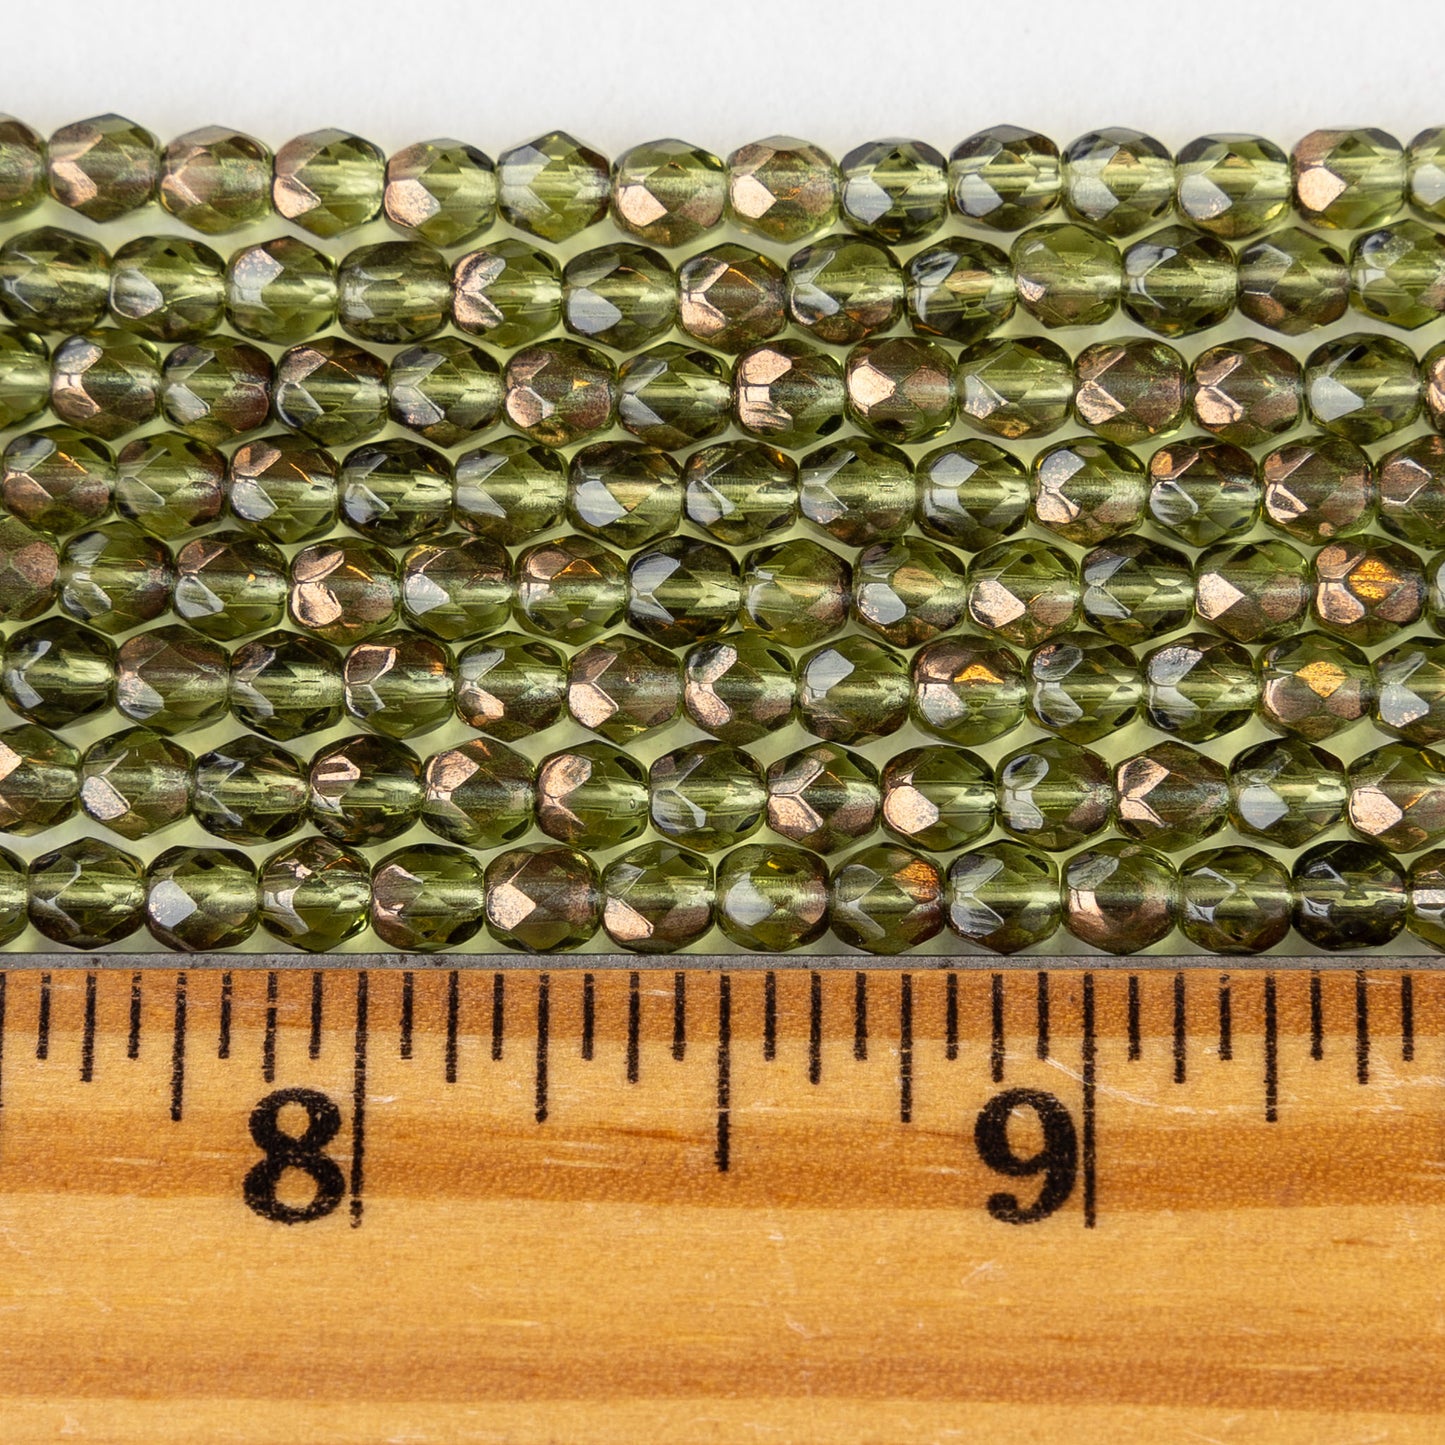 4mm Round Firepolished Beads - Olivine with A Bronze Half Coat - 50